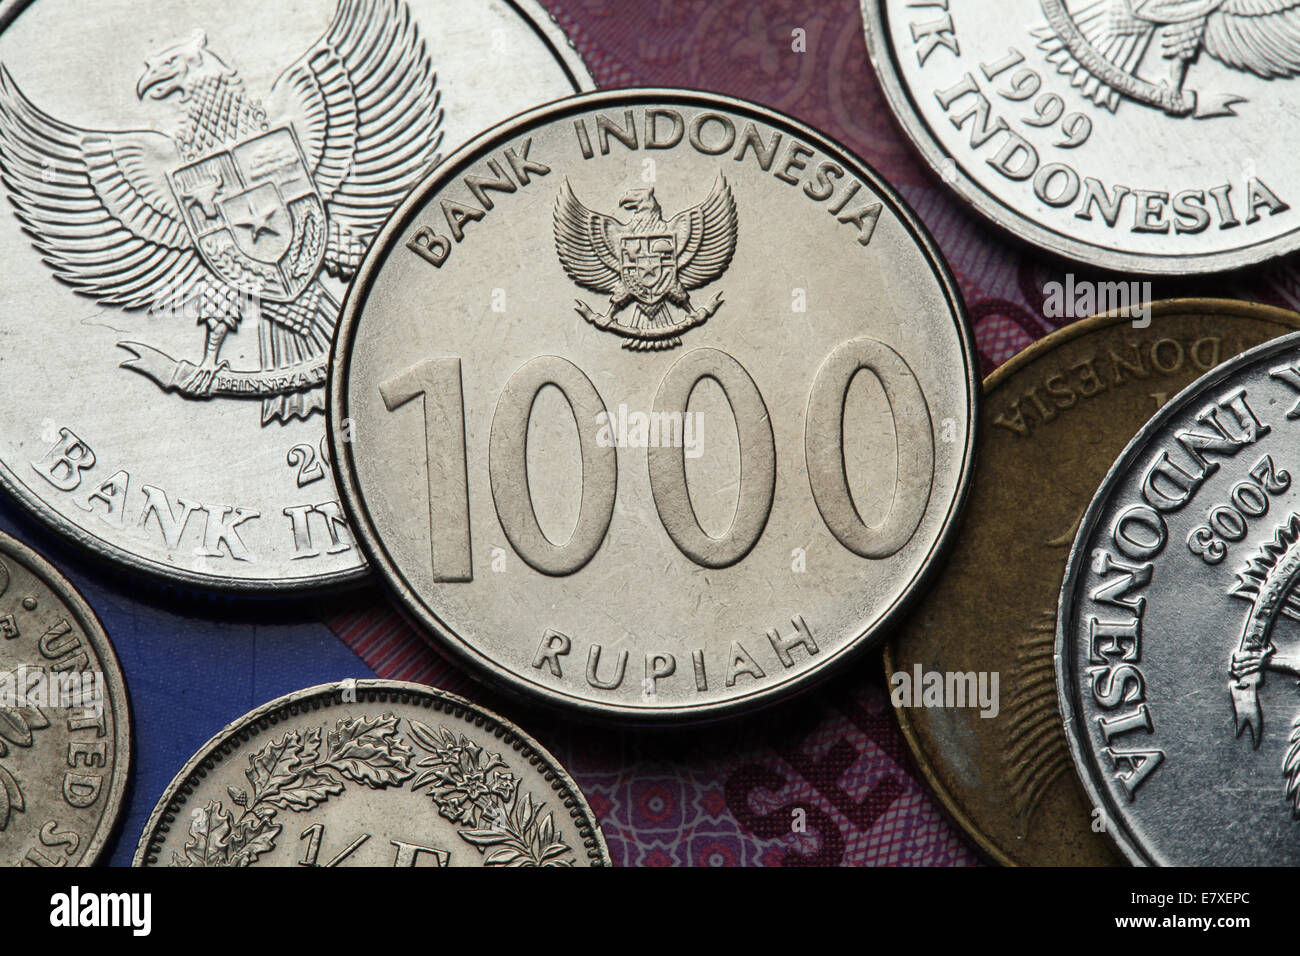 Coins of Indonesia. Indonesian national emblem called the Garuda Pancasila depicted in the Indonesian one thousand rupiah coin. Stock Photo